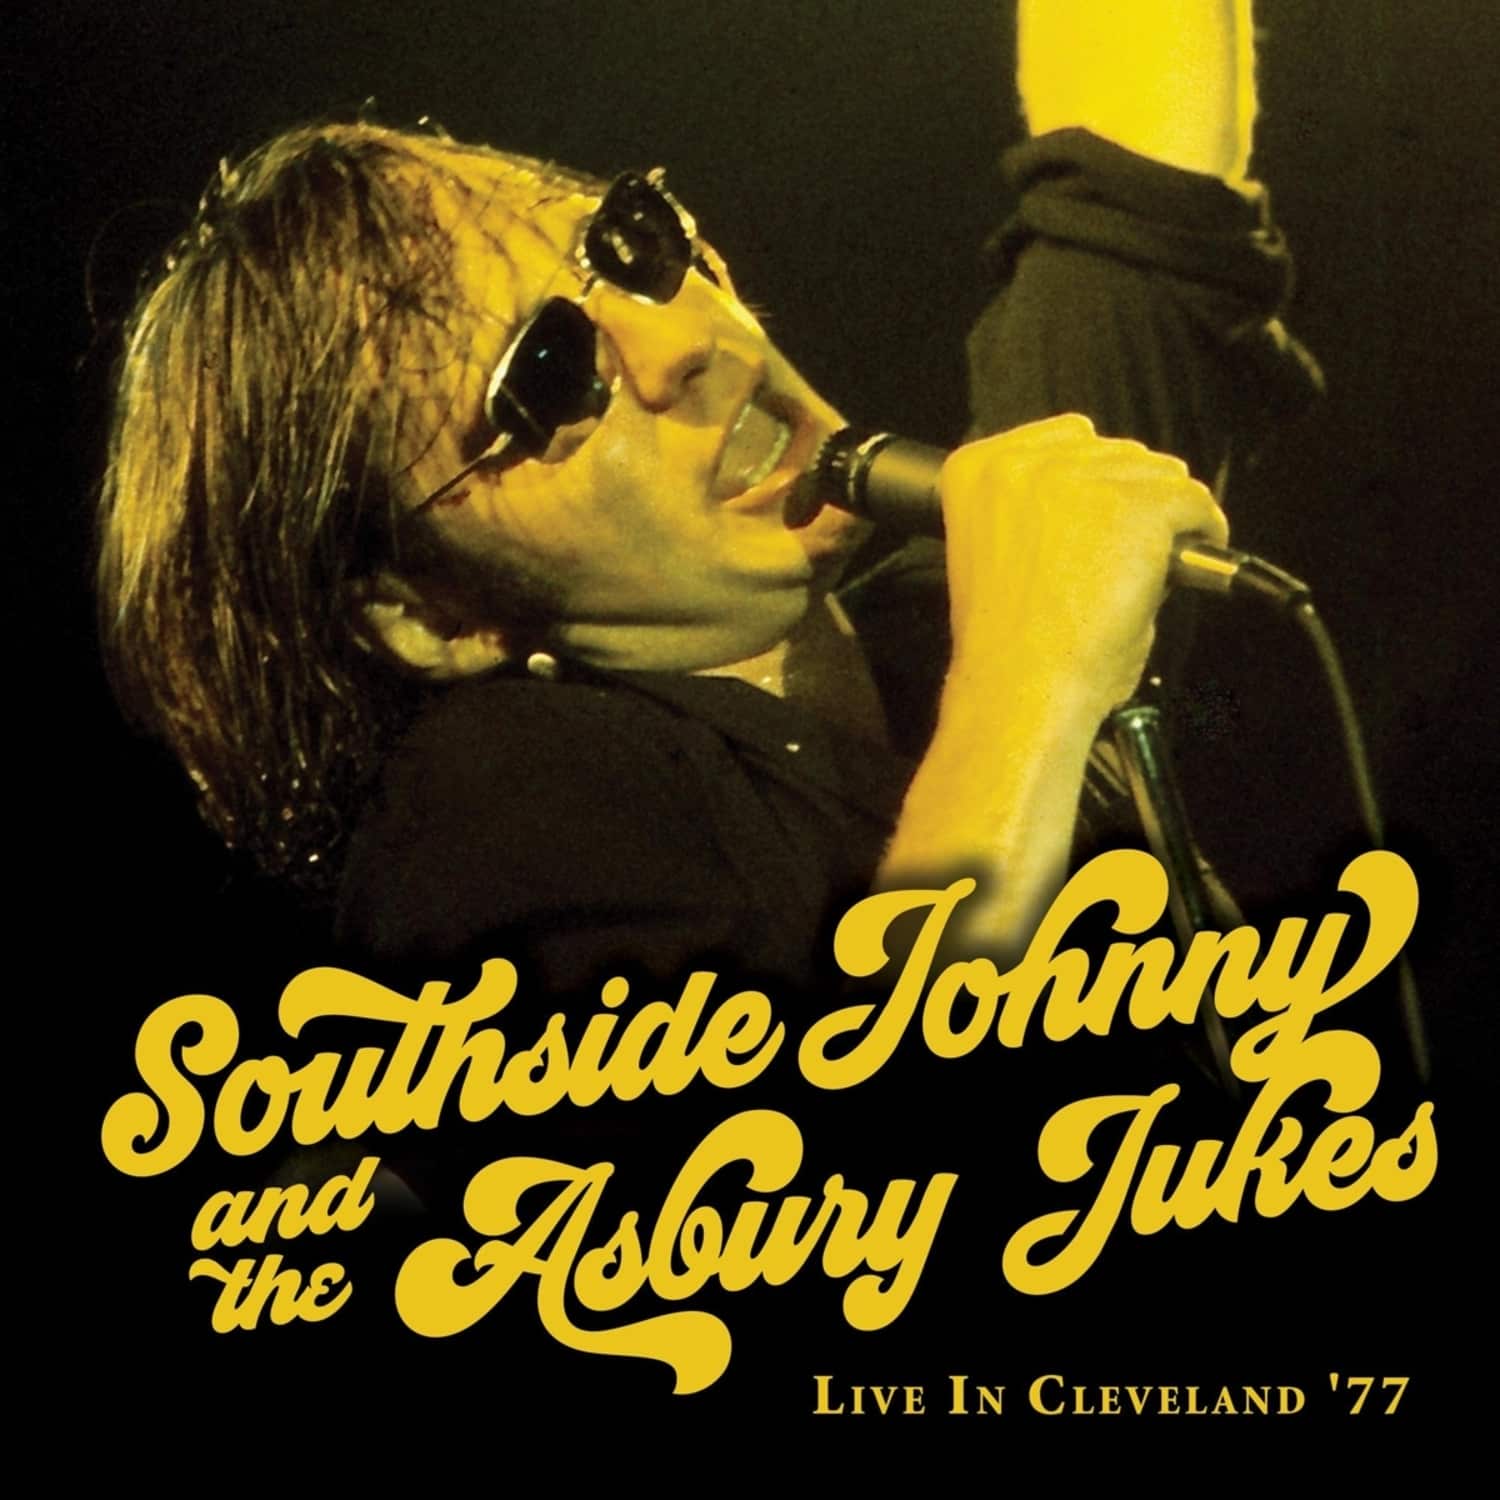 Southside Johnny & The Asbury Jukes - LIVE IN CLEVELAND 77 